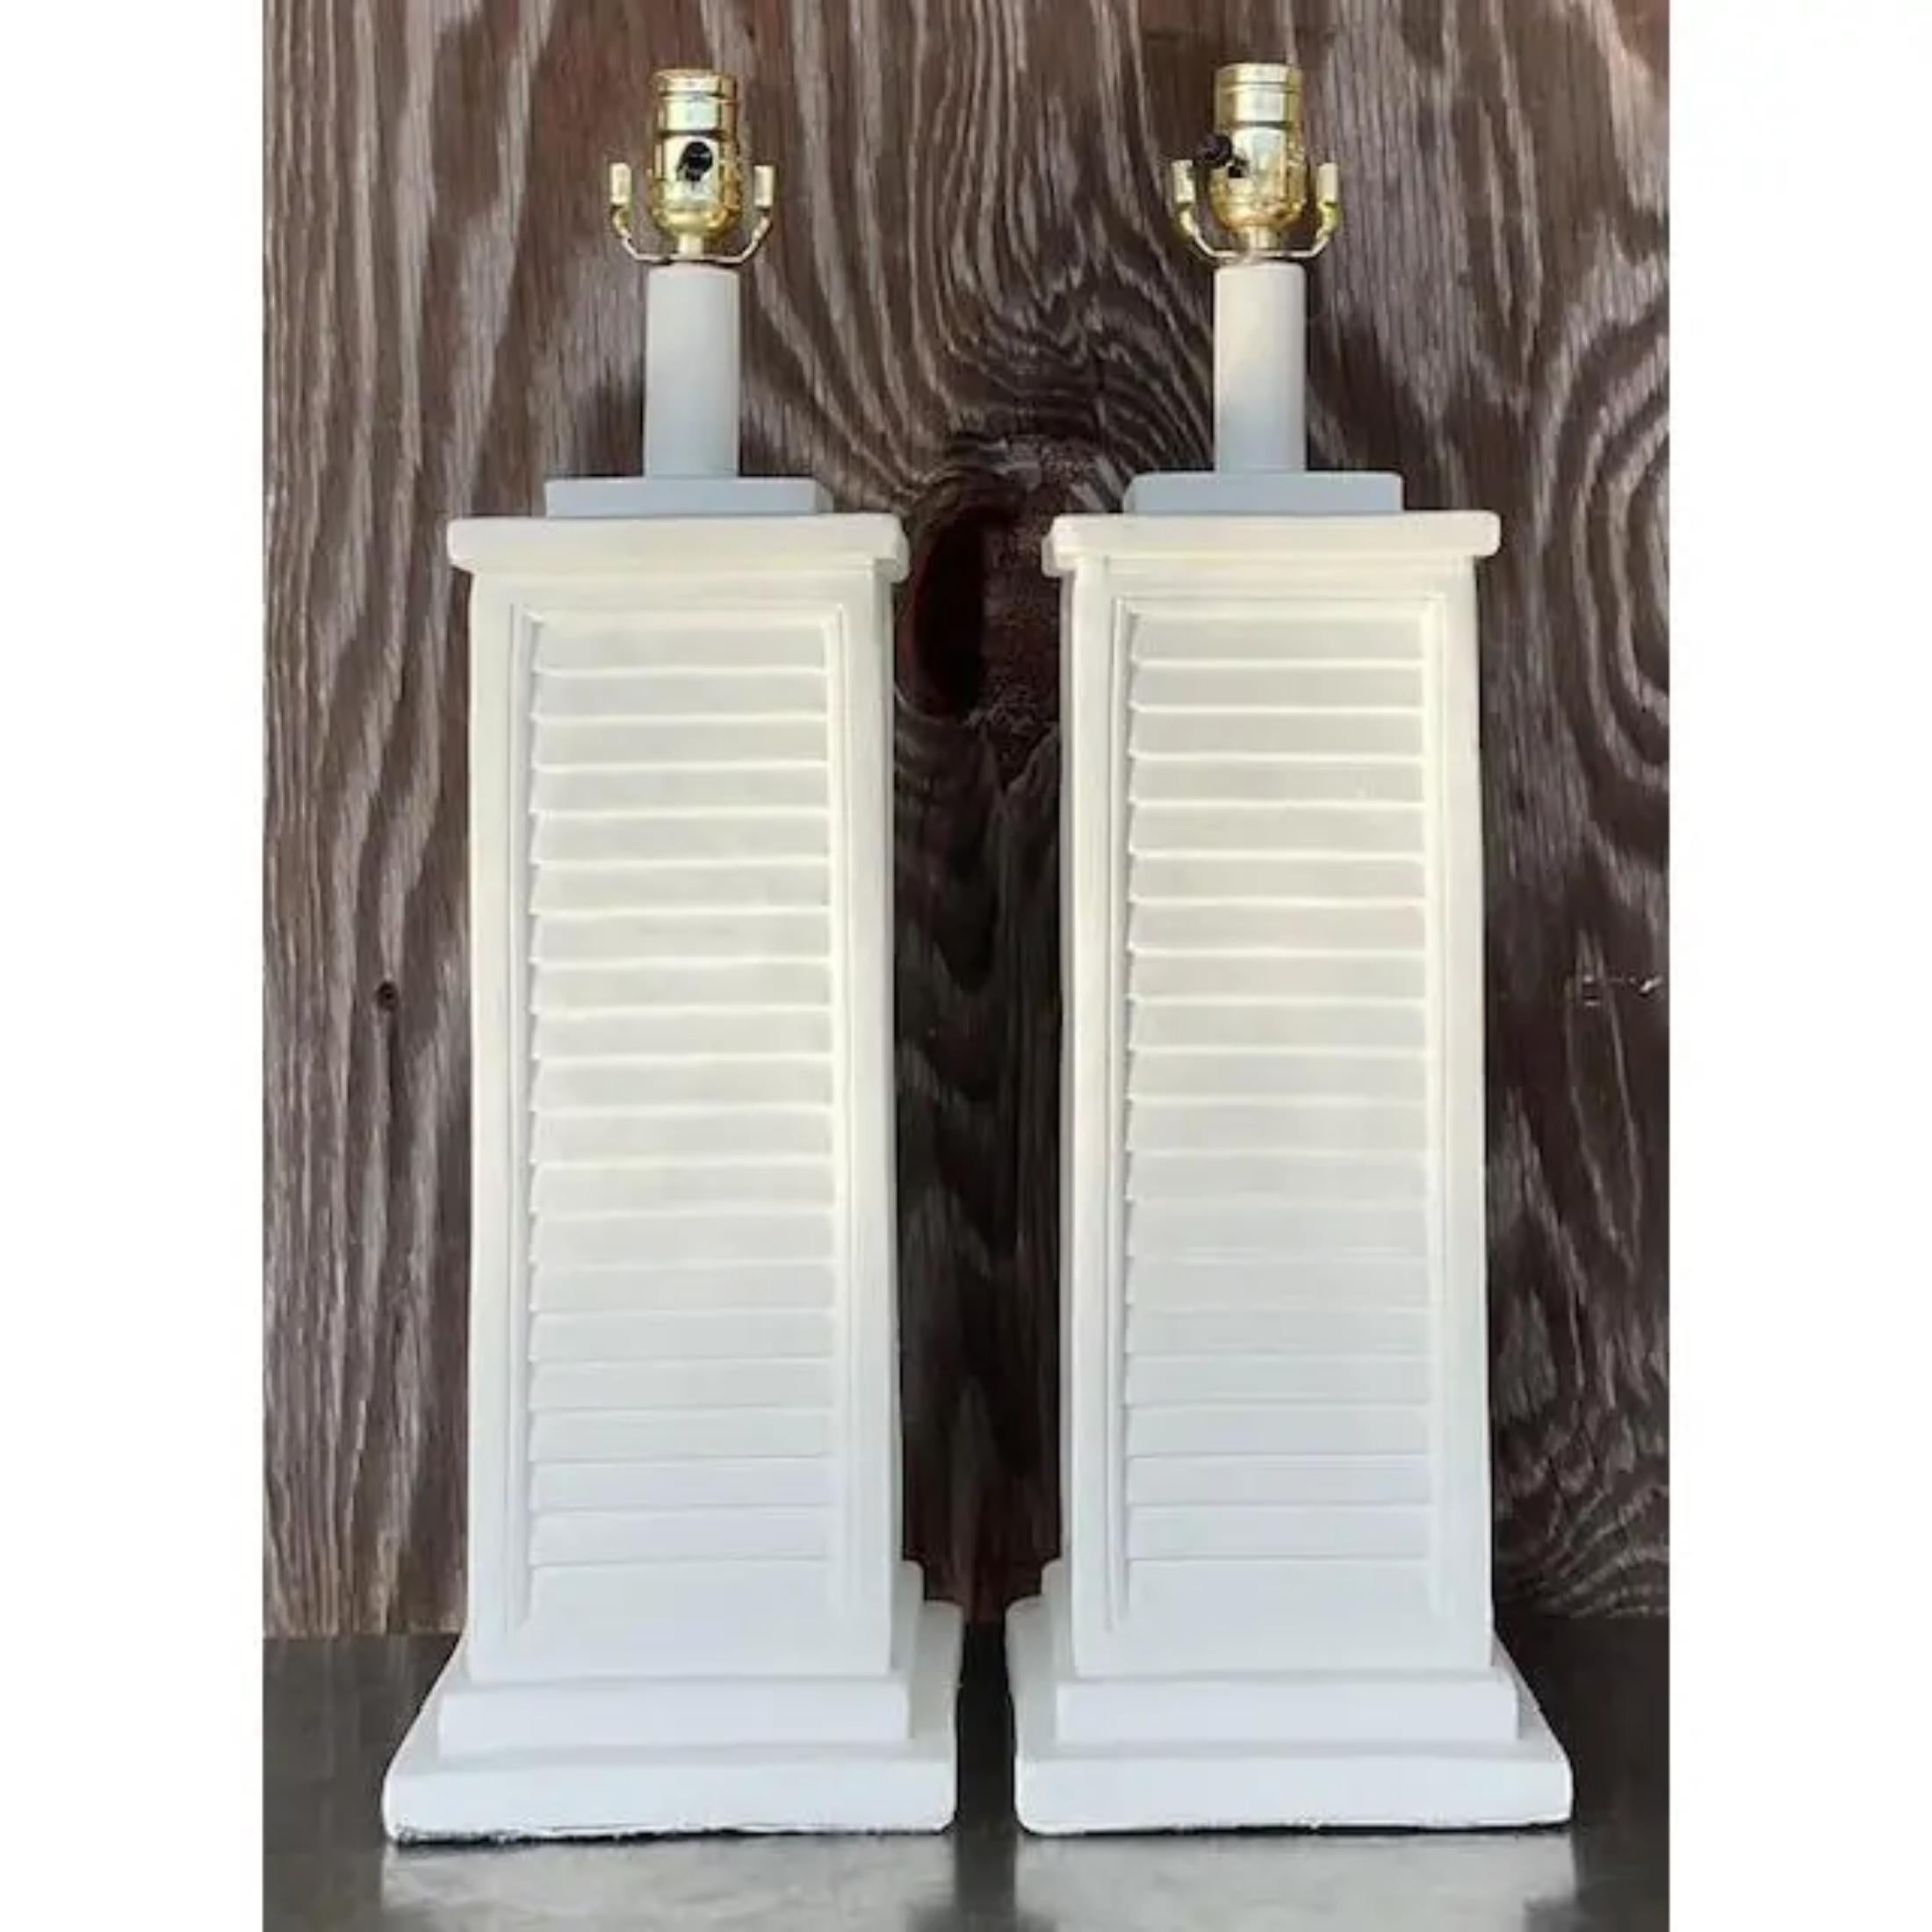 A fabulous pair of vintage Coastal table lamps. A chic white plaster finish on a chic louvered design. Acquired from a Palm Beach estate. less